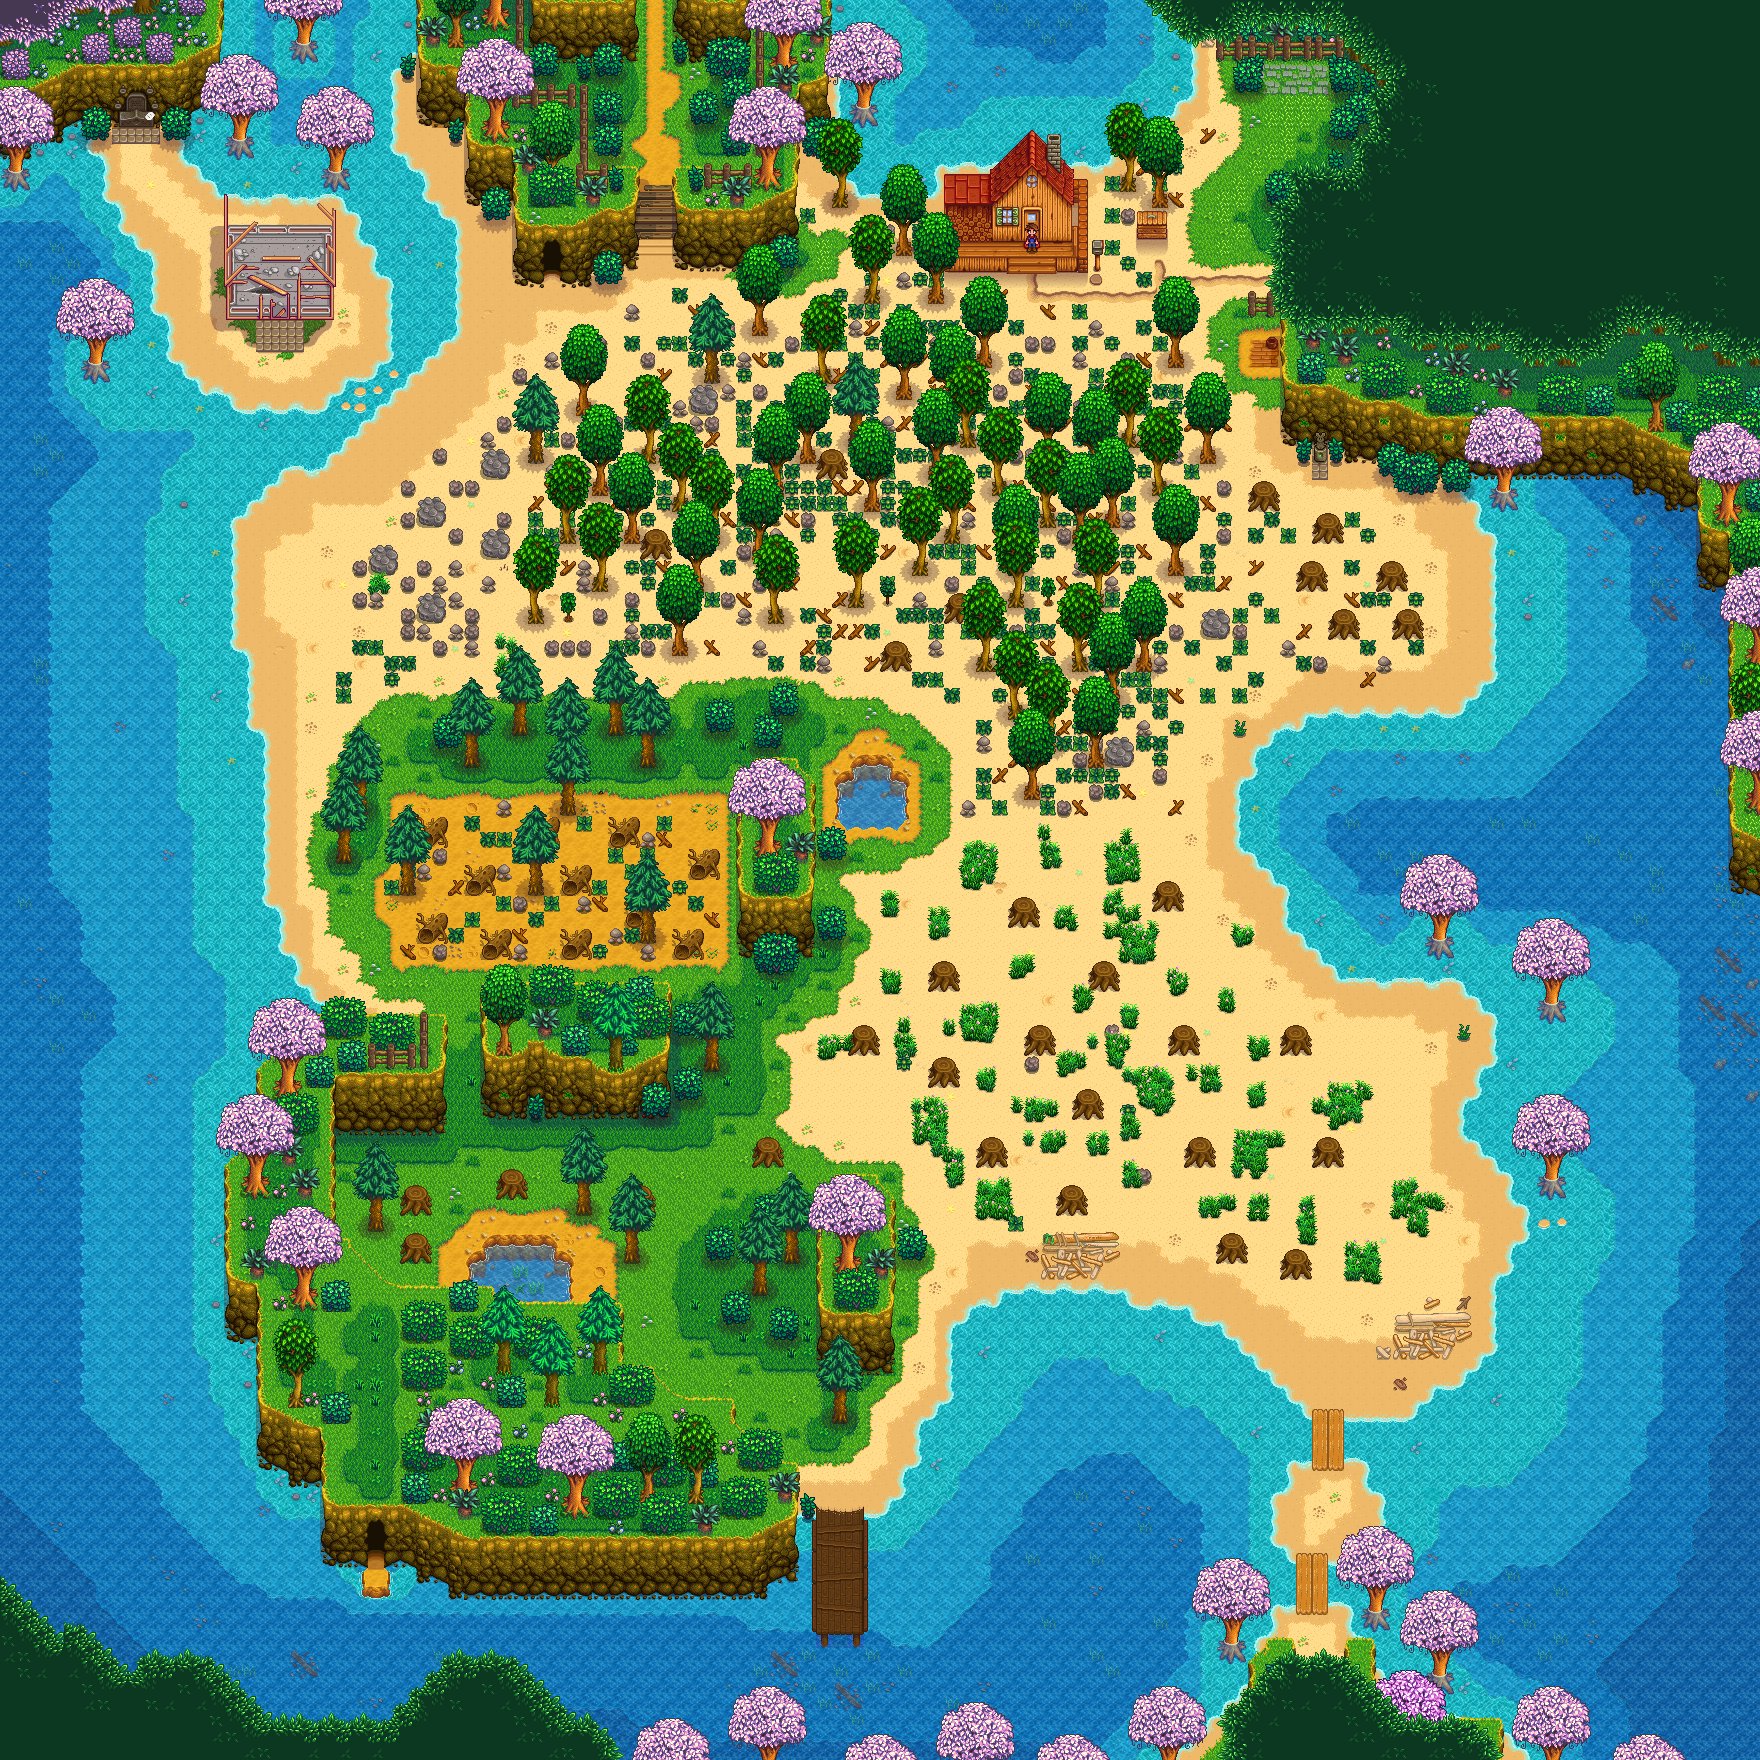 Stardew Valley Update 1.5 Will Add Advanced Options and a Beach Farm With Little Soil